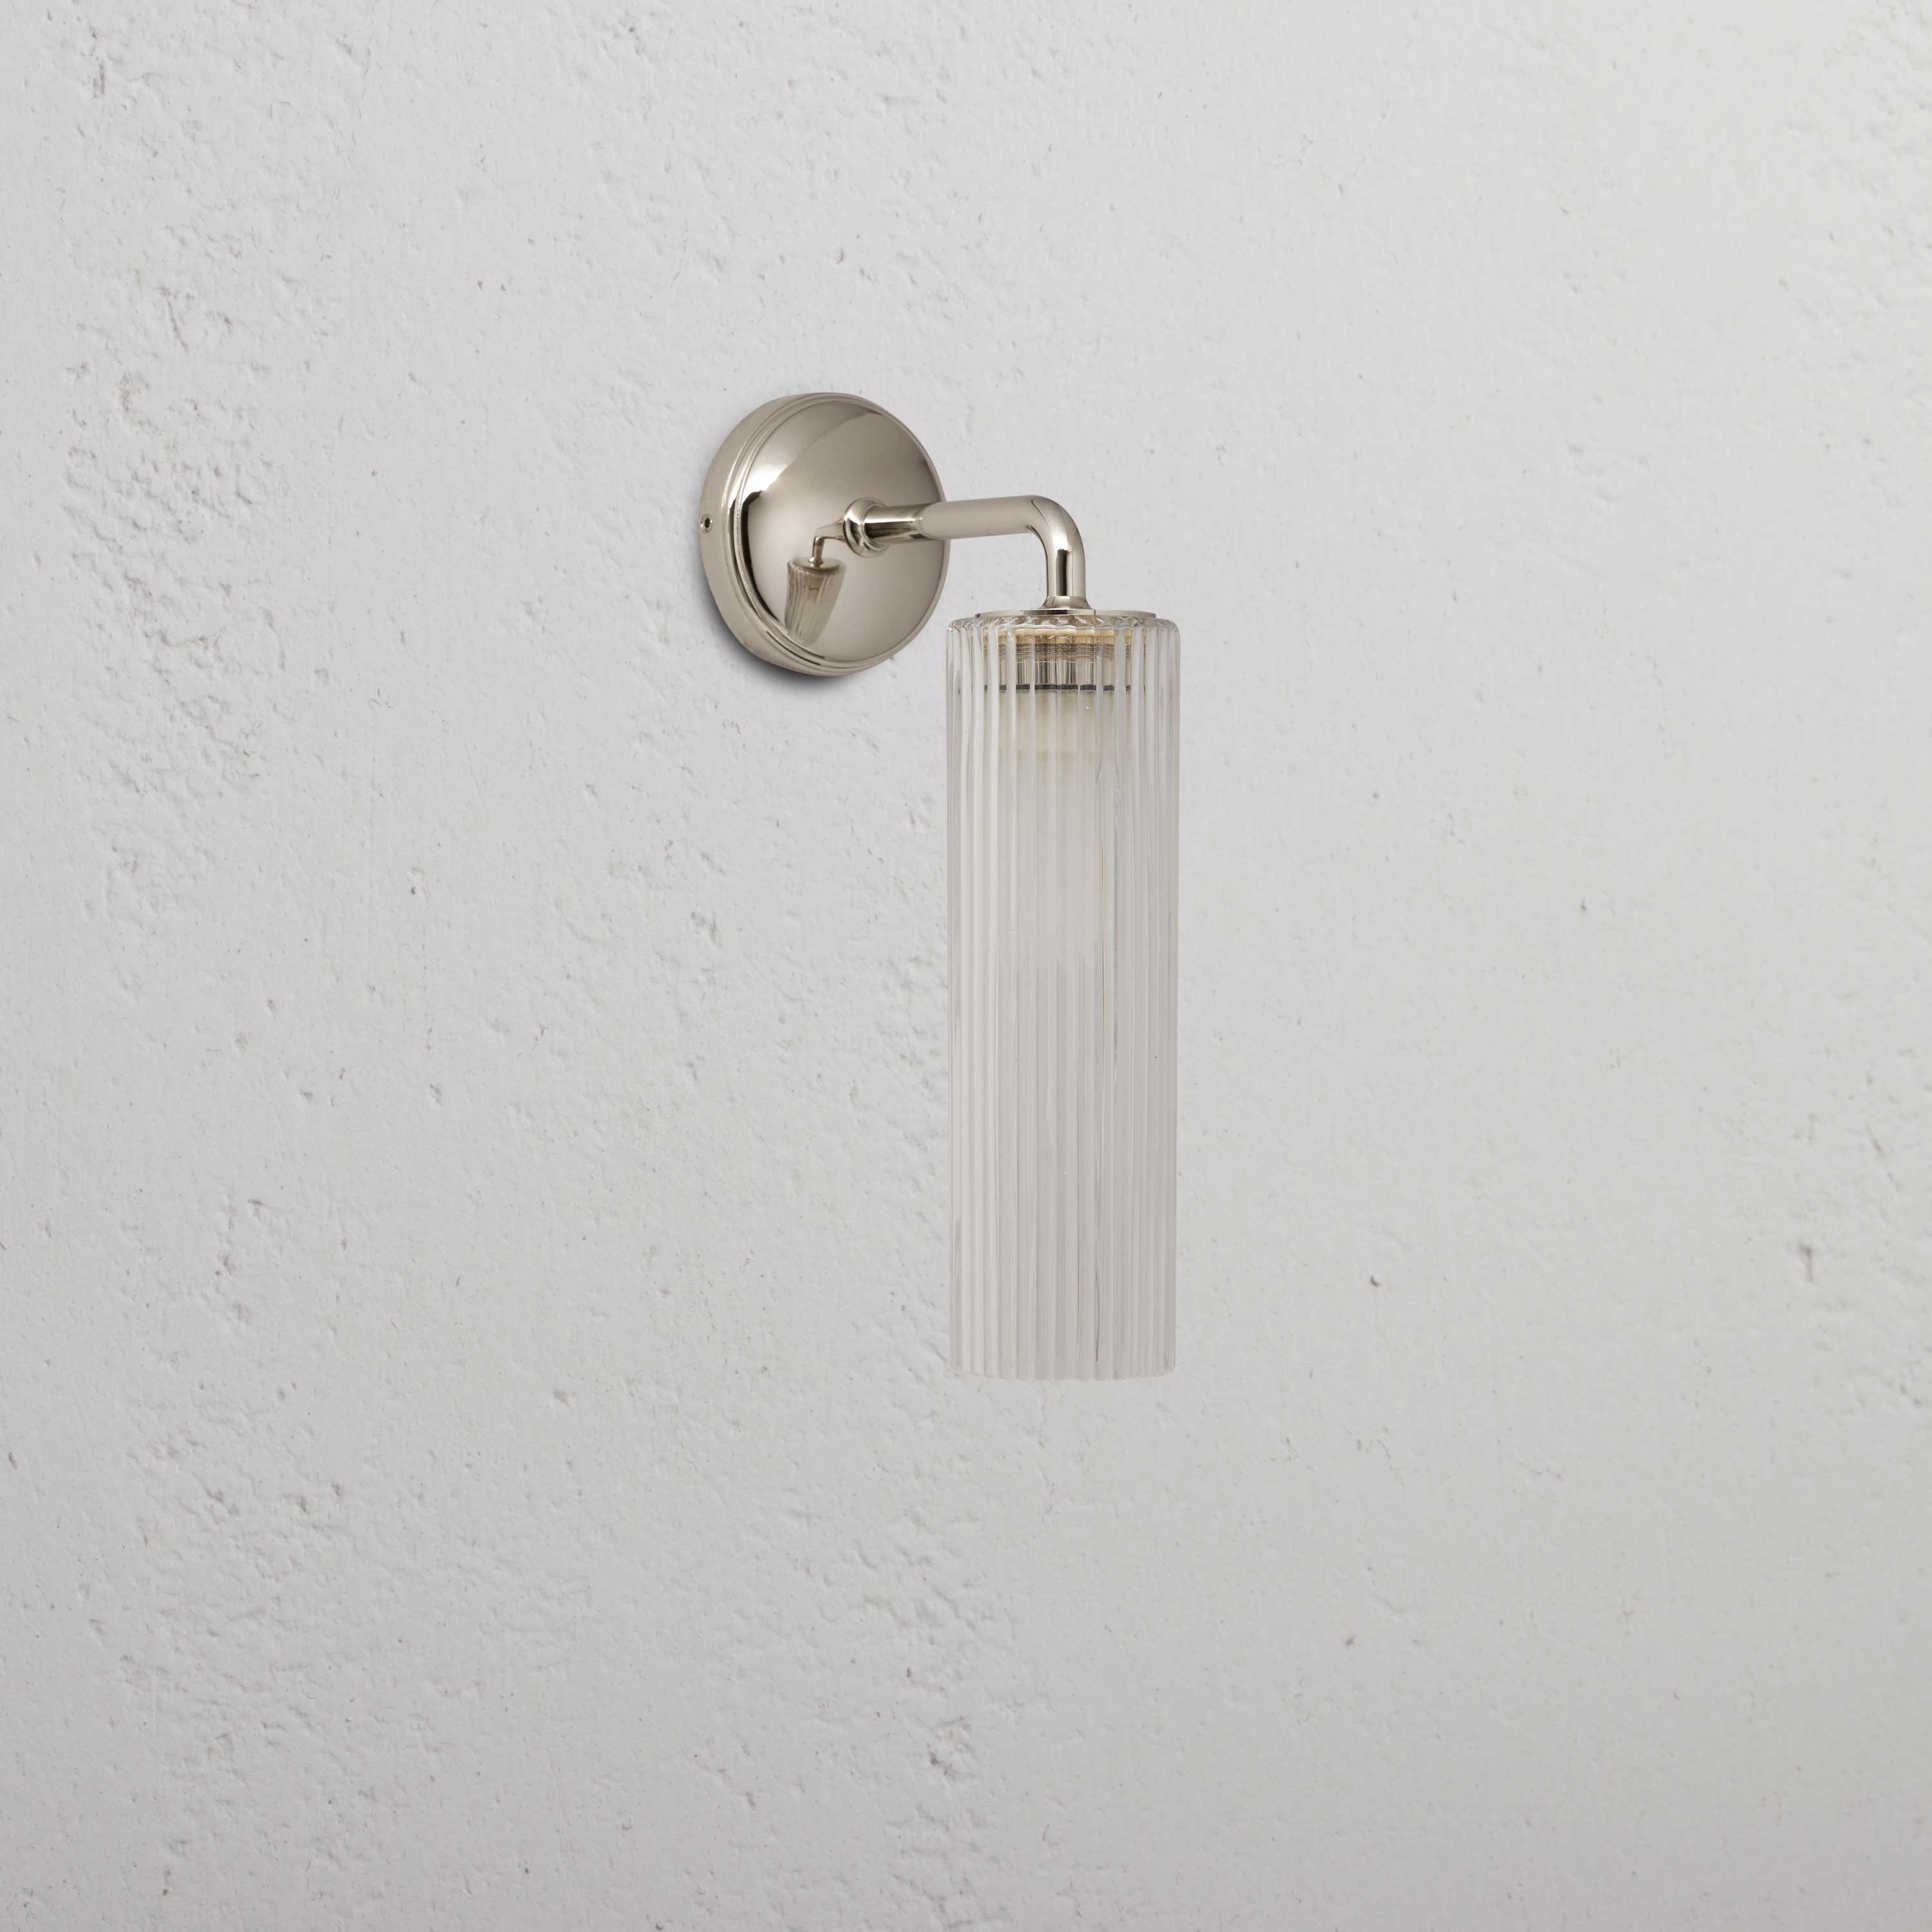 Polished Nickel Fixed Wall Light with Fluted Glass Shade